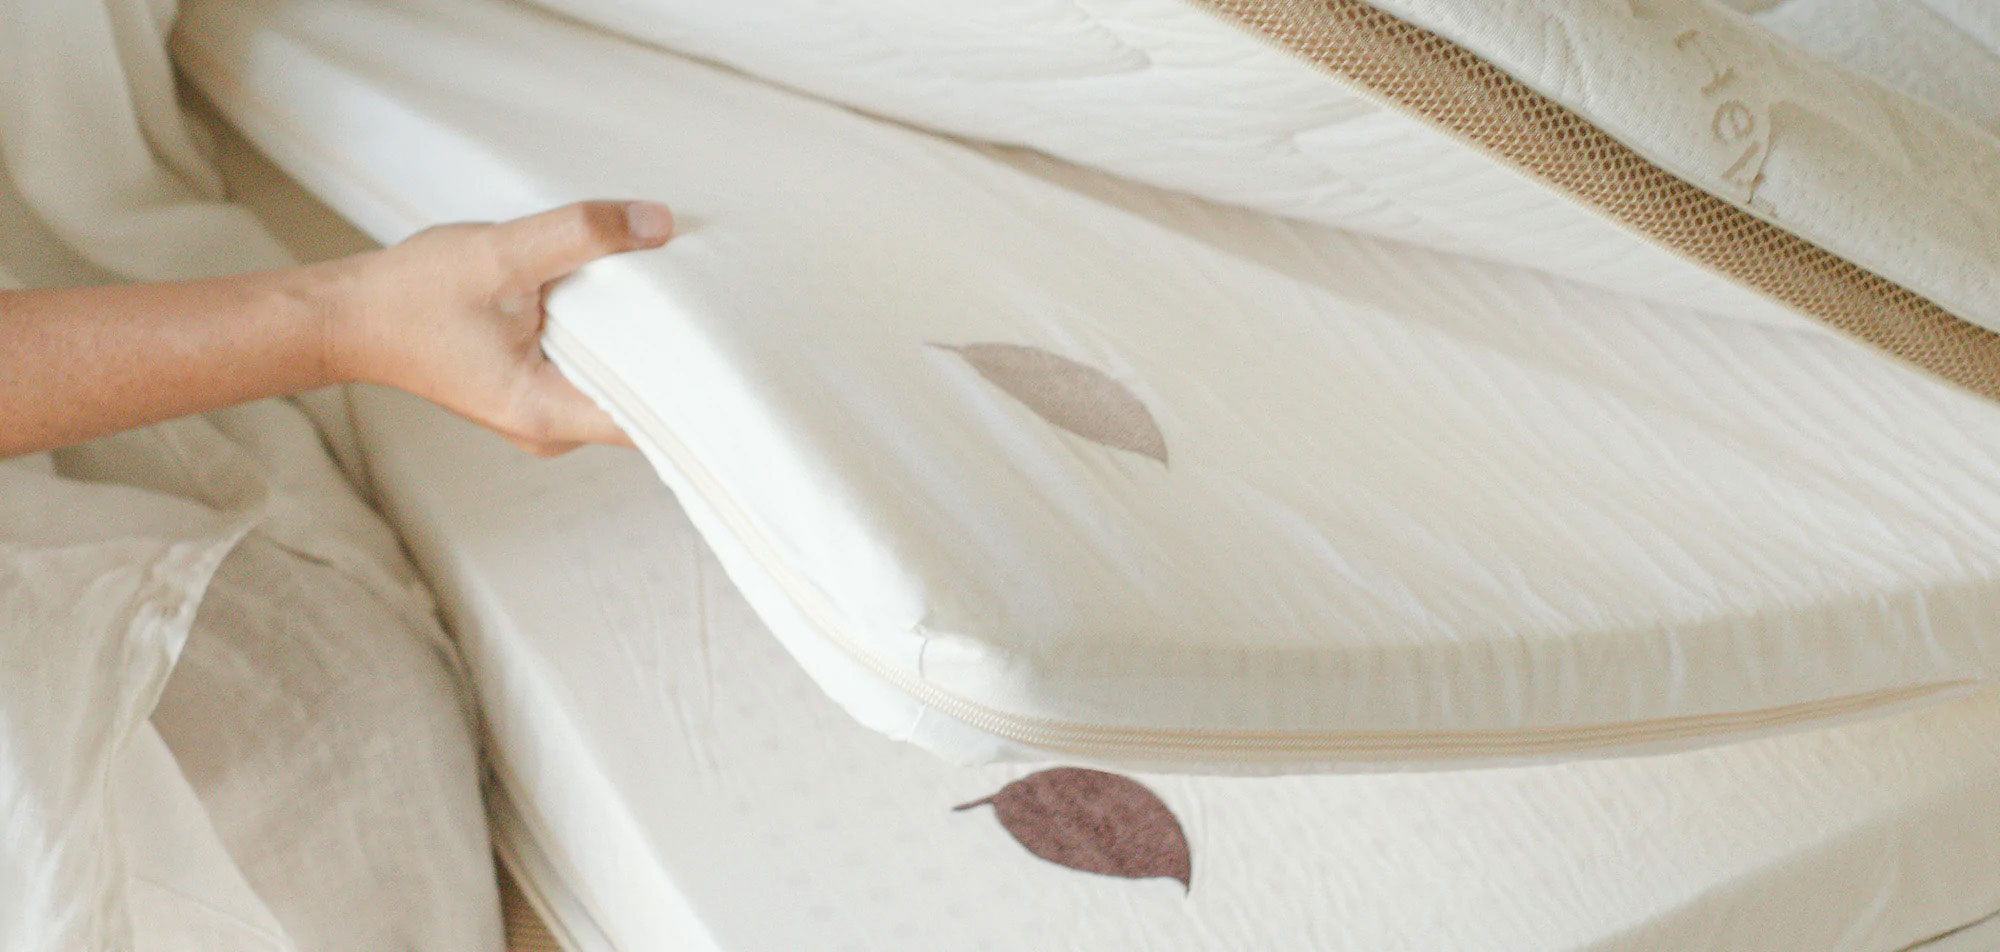 Anti-mite bedding for allergy sufferers